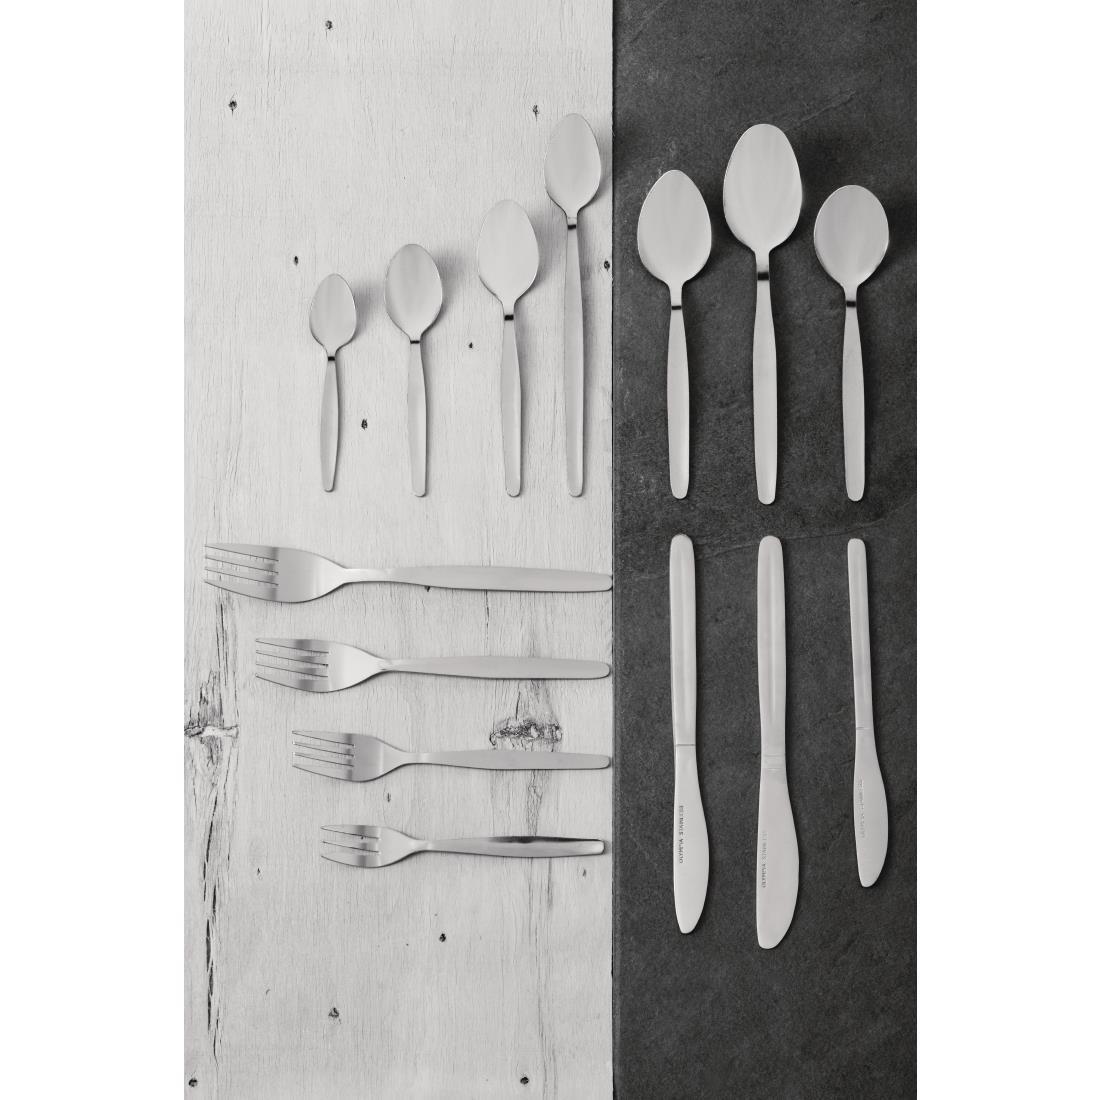 Olympia Kelso Childrens Fork (Pack of 12) - CB064  - 4